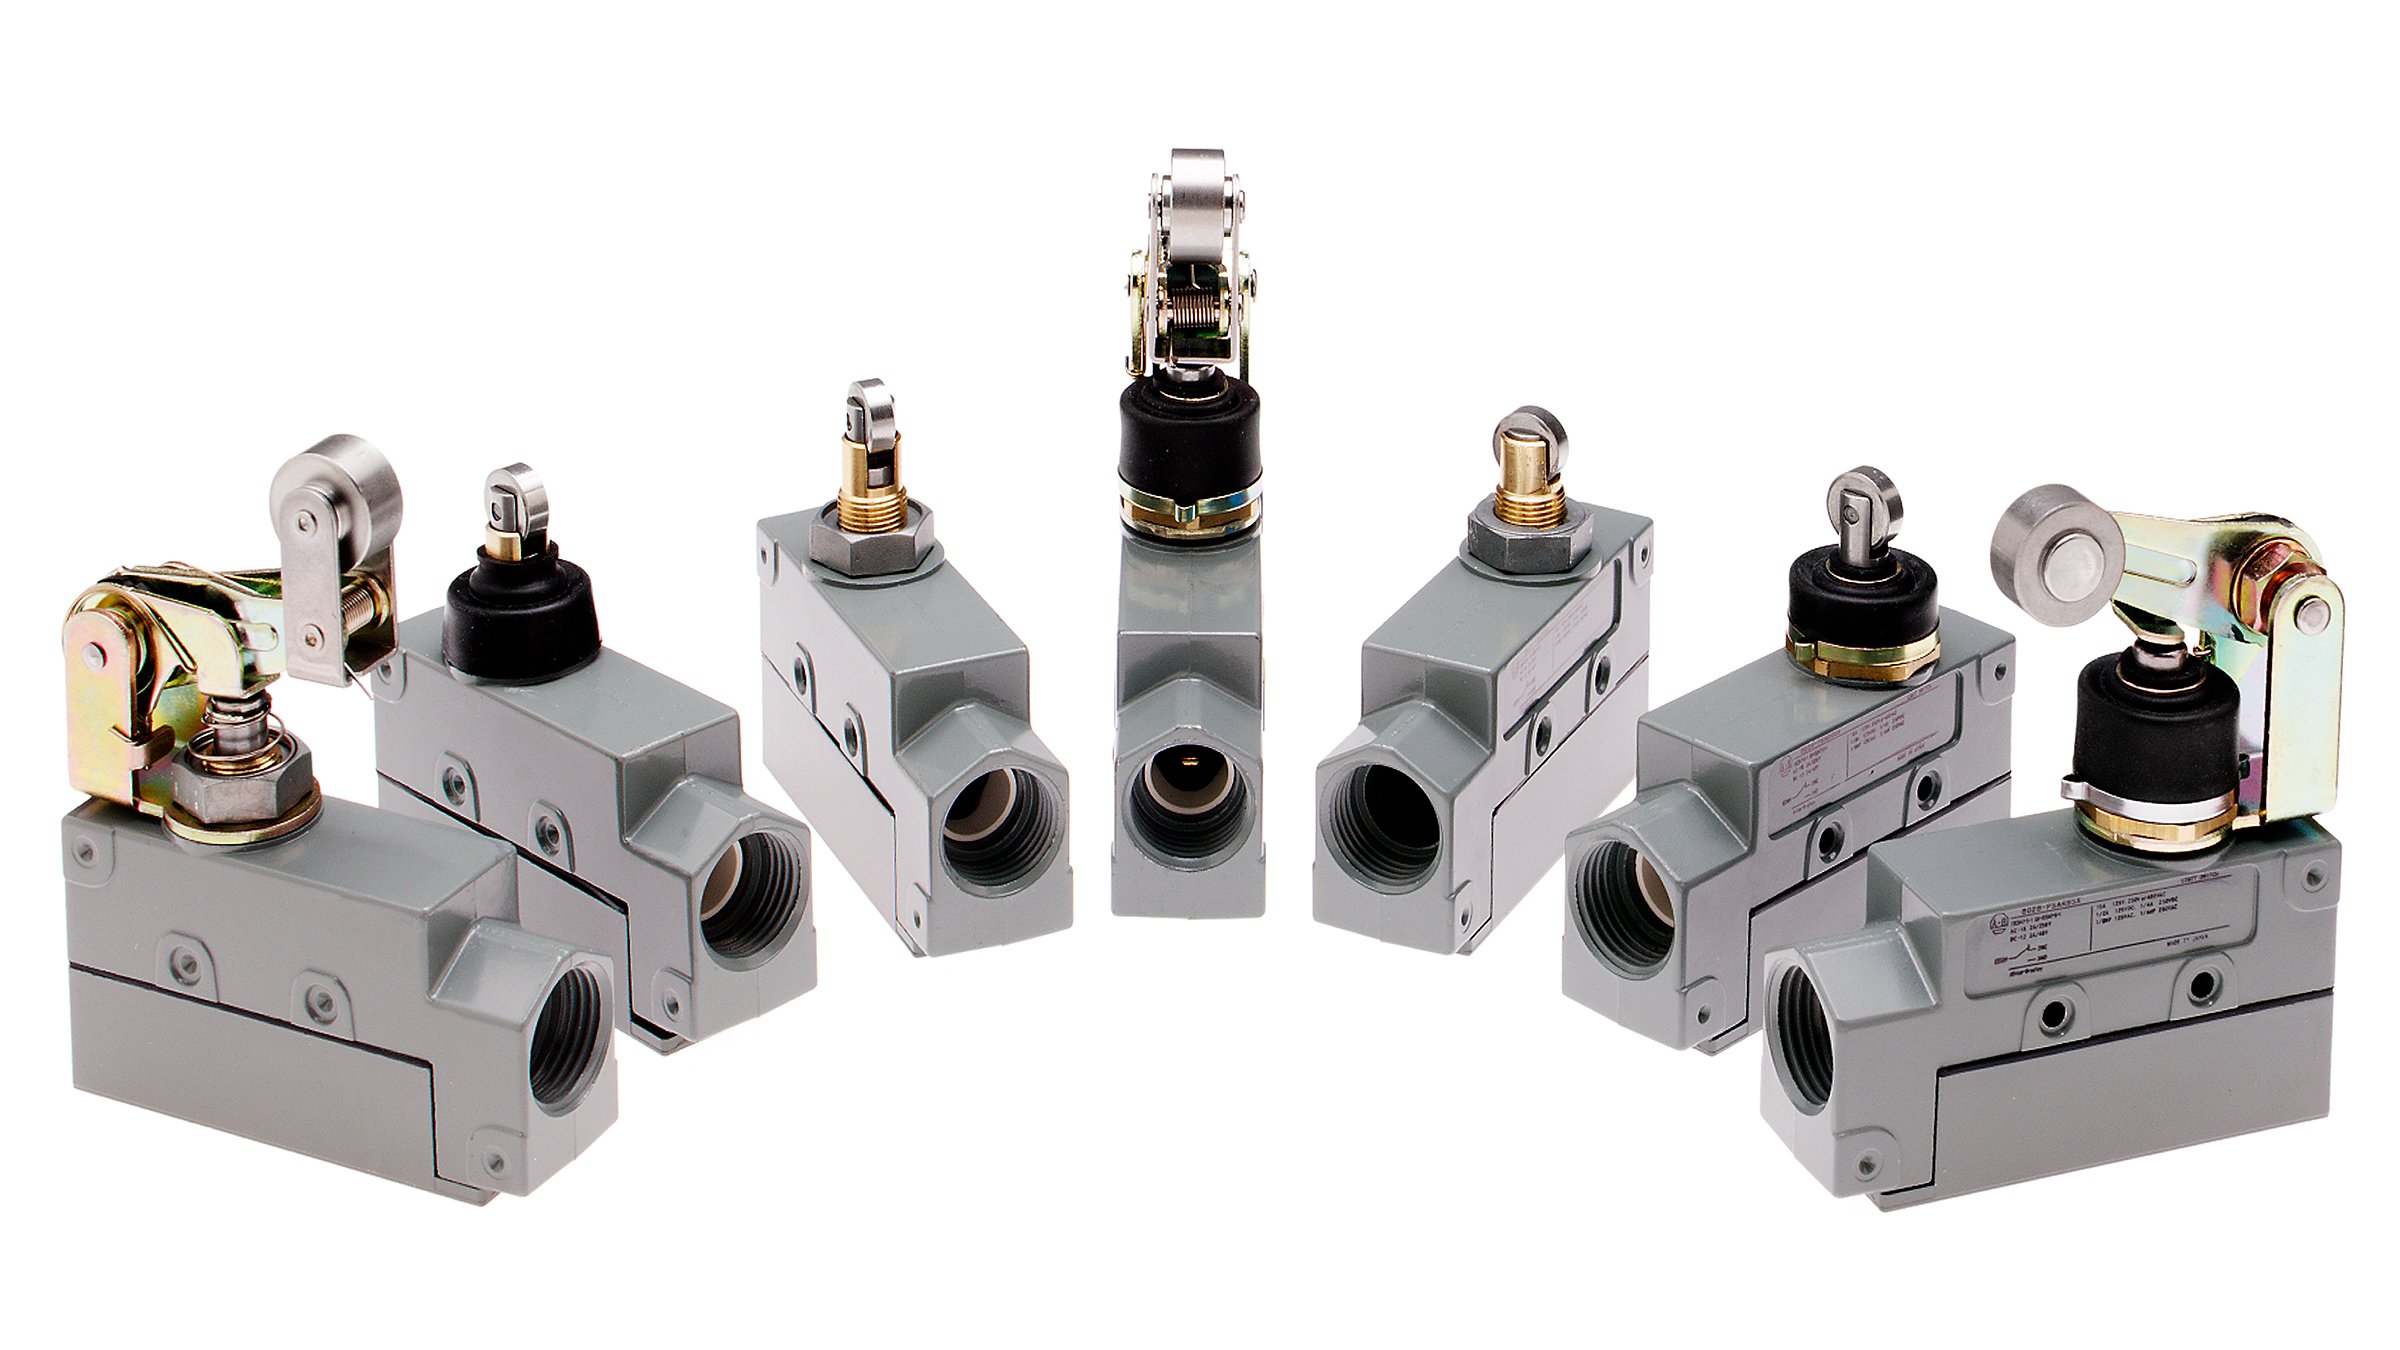 802b-precision-limit-switches-family